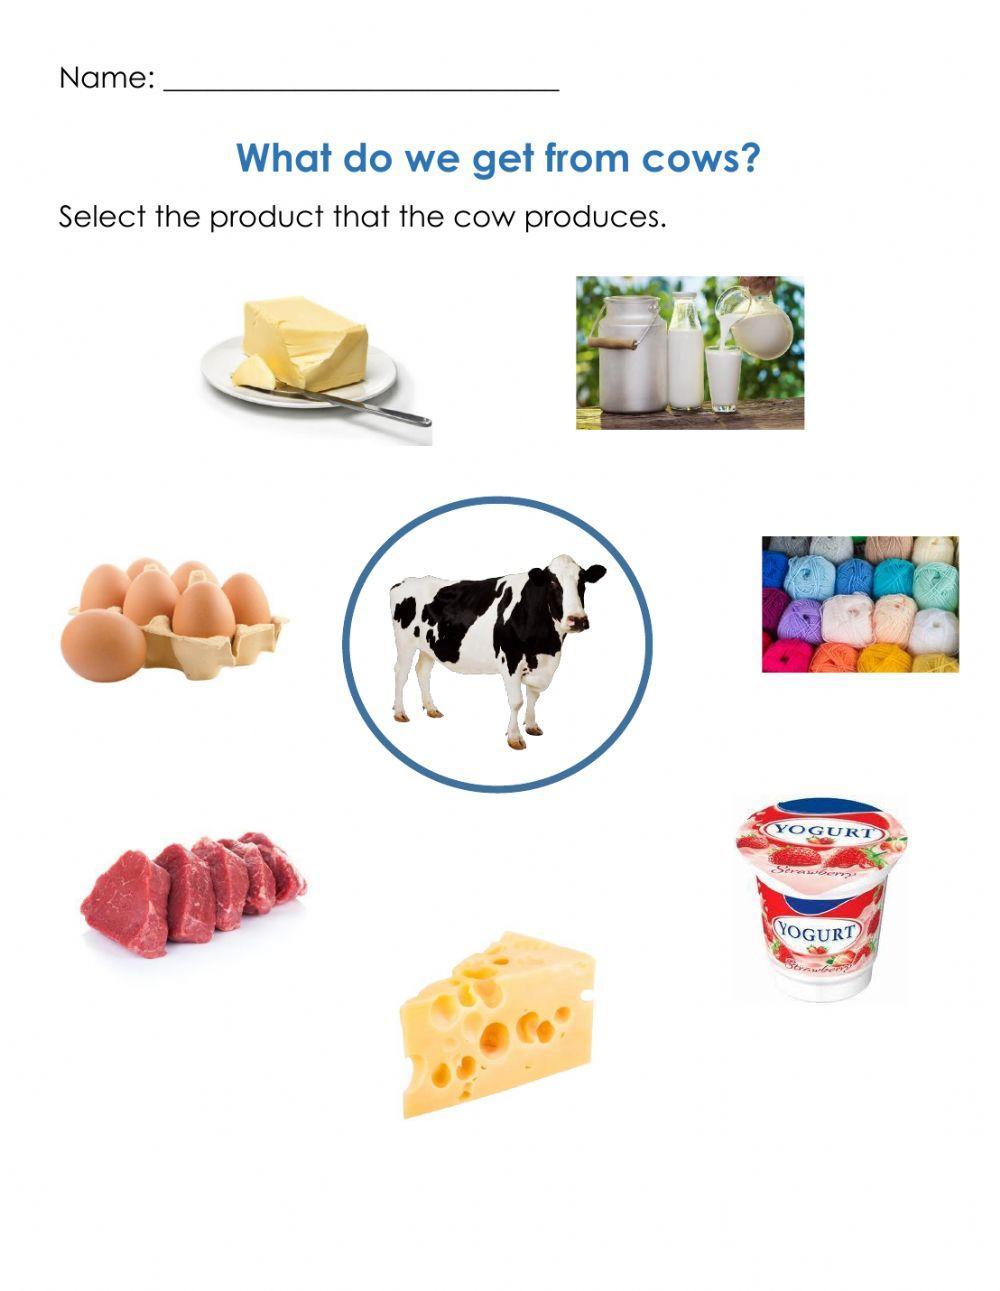 What do we get from cow?